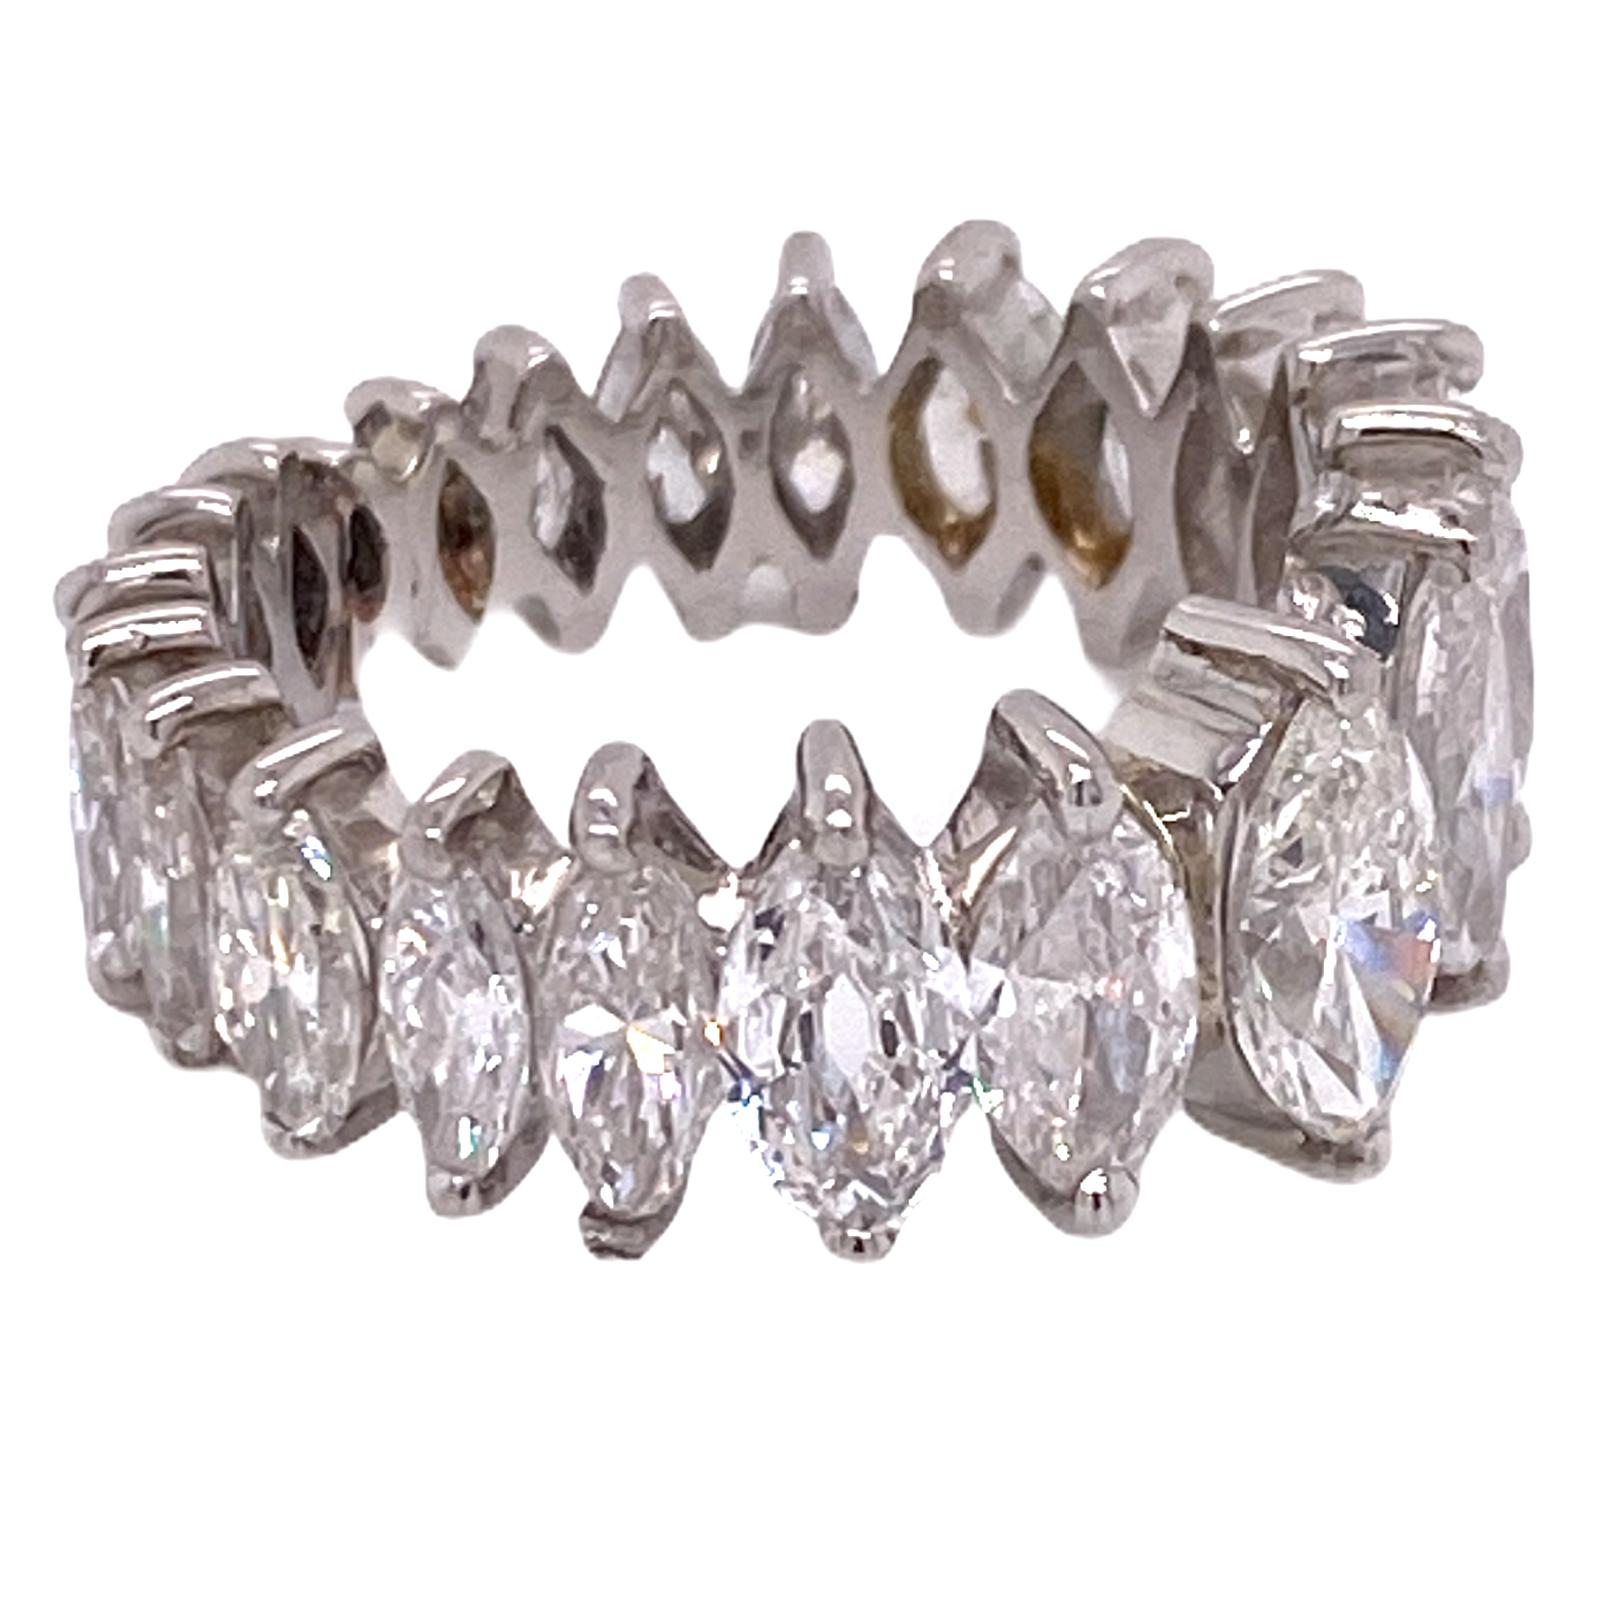 Beautiful graduated diamond eternity band handmade in platinum. The 22 marquise diamonds weigh approximately 3.00 carat total weight, and are graded G-H color and VS clarity. The band is size 6, and is graduated from 9mm in the front to 7mm in the